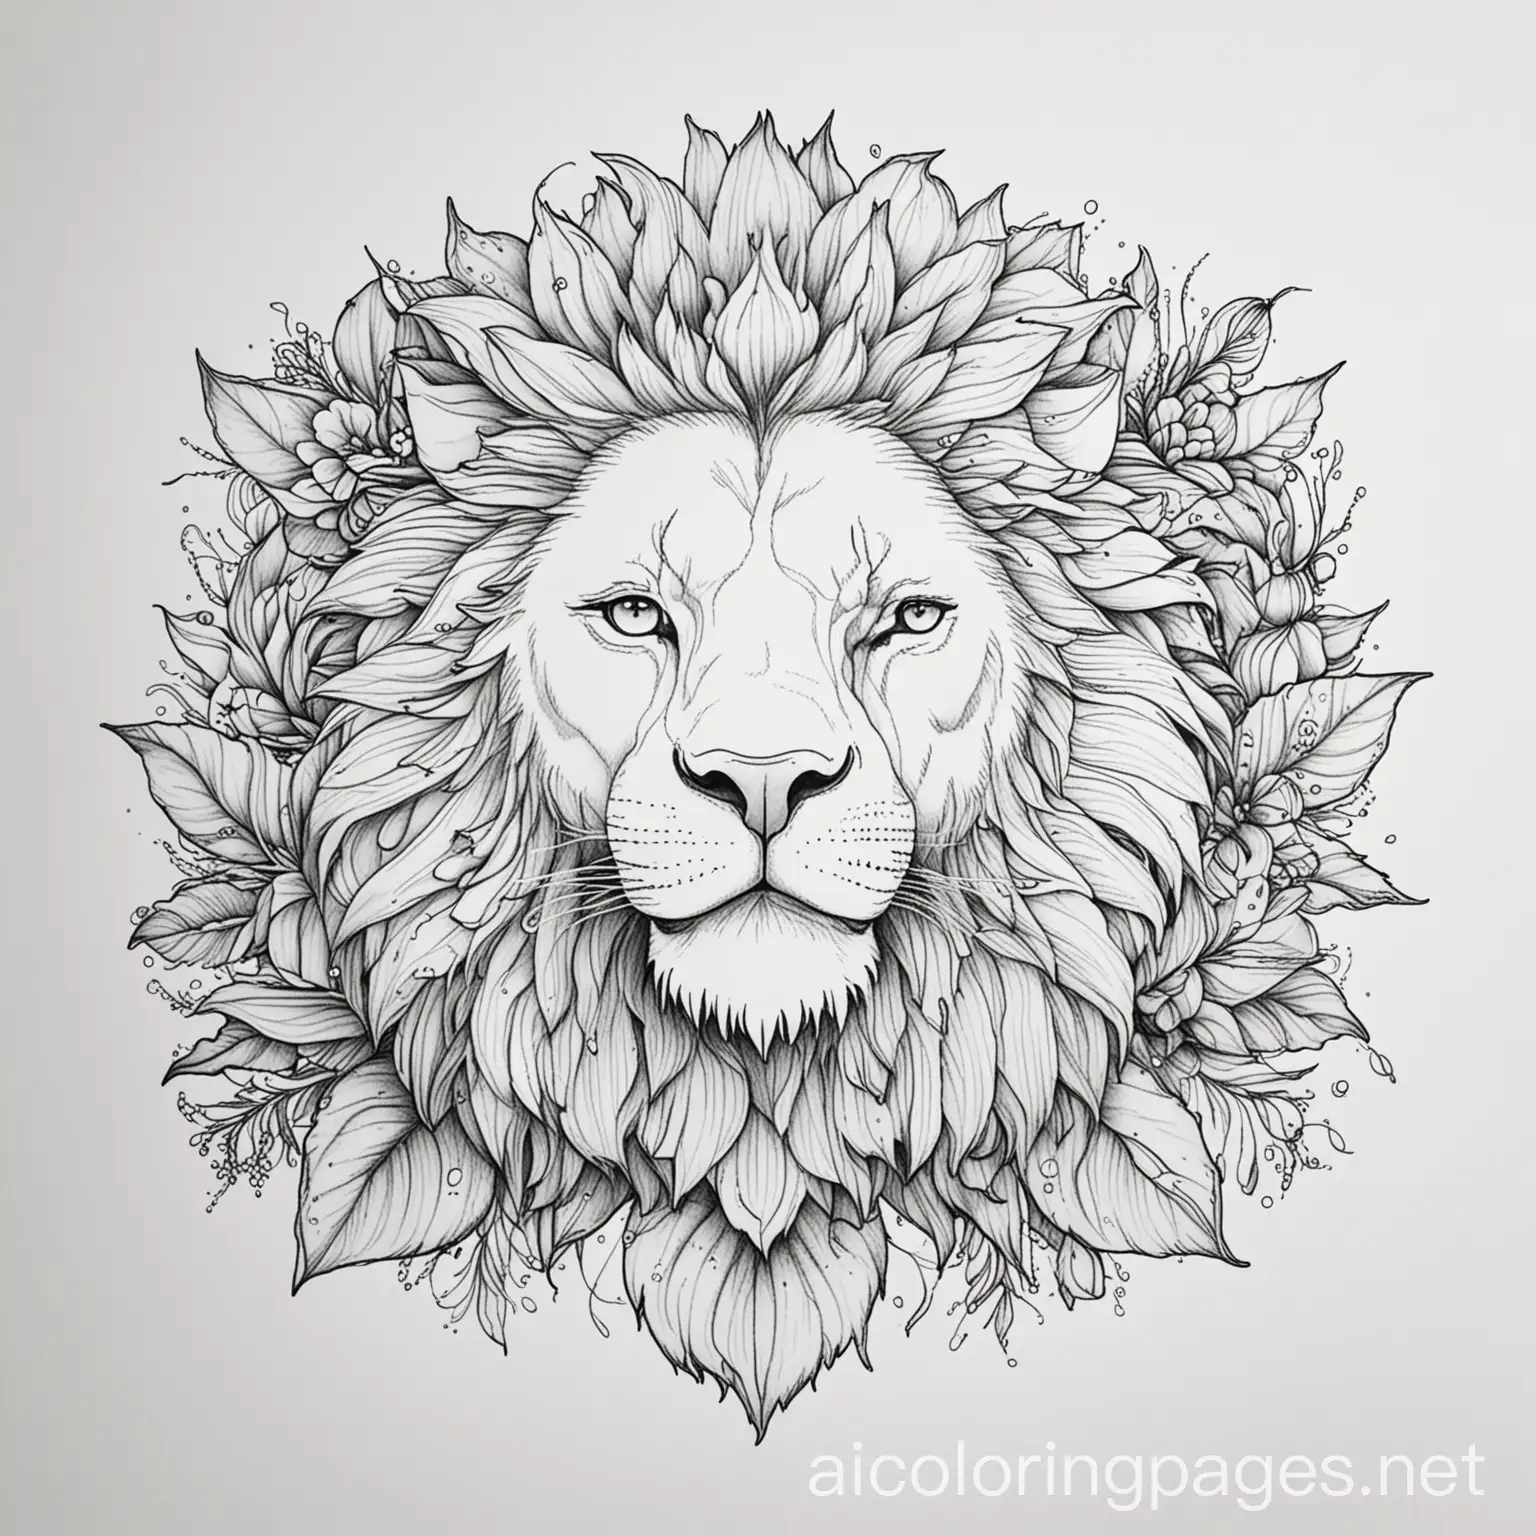 LION FLOWER, Coloring Page, black and white, line art, white background, Simplicity, Ample White Space. The background of the coloring page is plain white to make it easy for young children to color within the lines. The outlines of all the subjects are easy to distinguish, making it simple for kids to color without too much difficulty